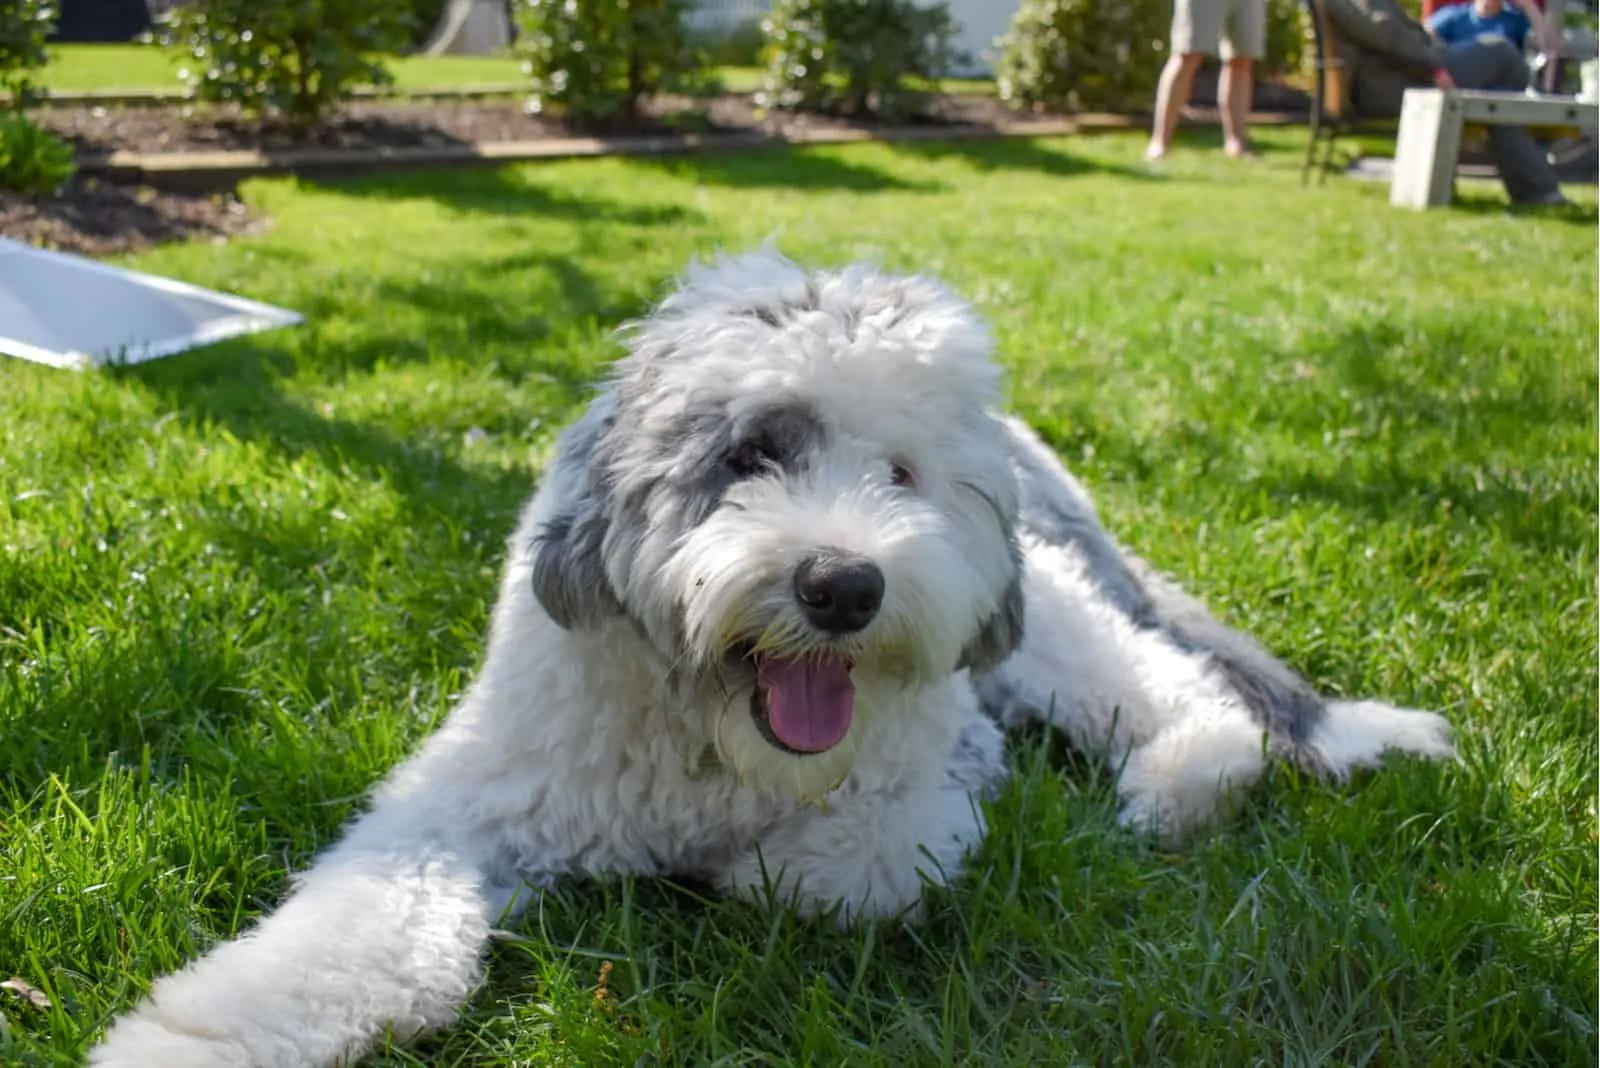 A Sheepadoodle puppy dog lying on The Grass